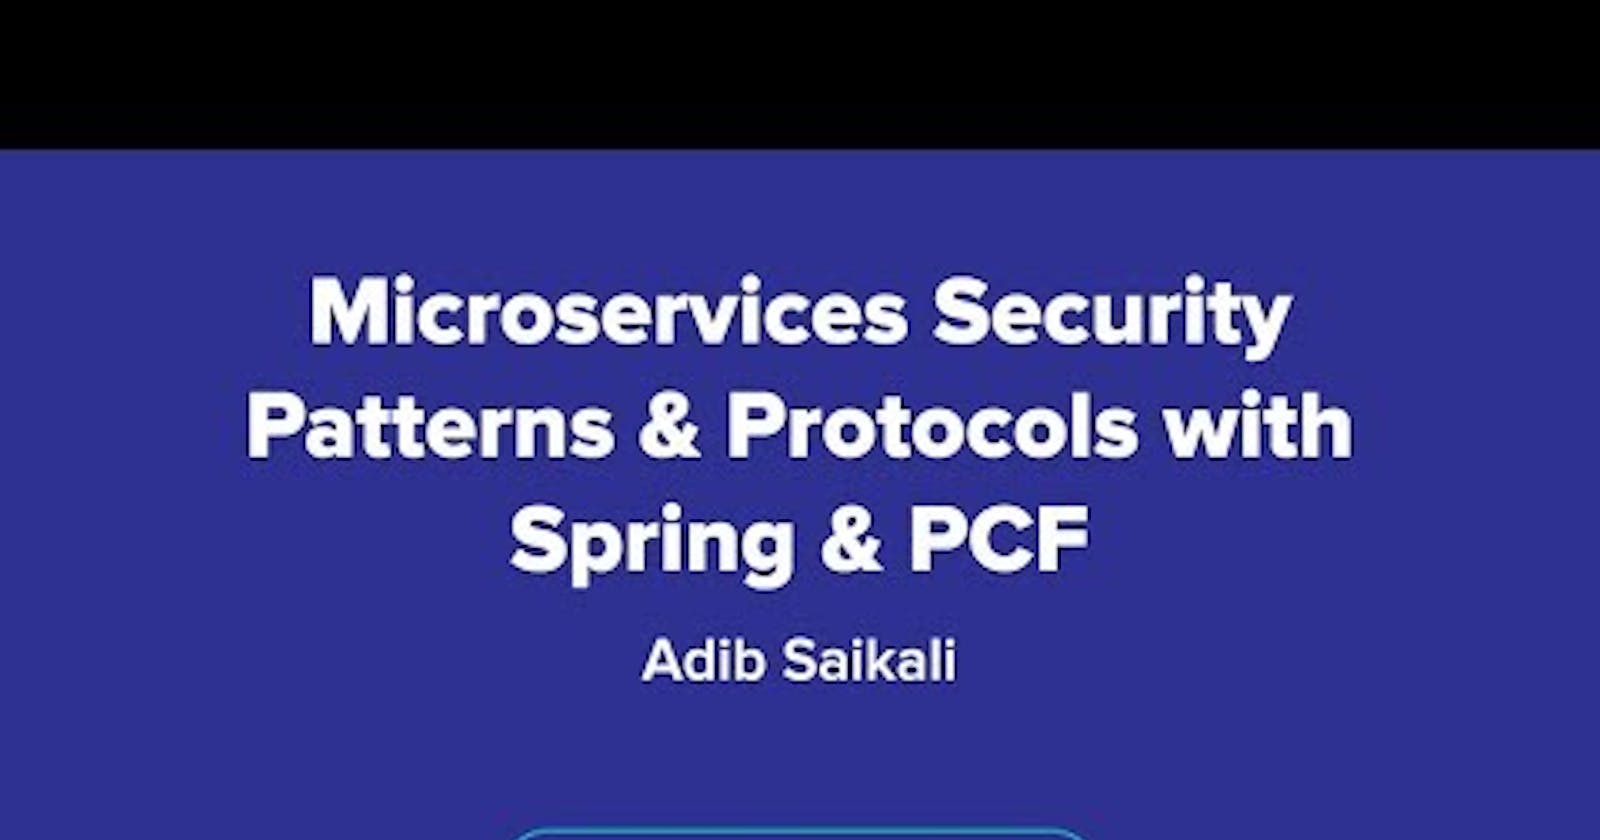 Microservices Security Patterns & Protocols with Spring & PCF